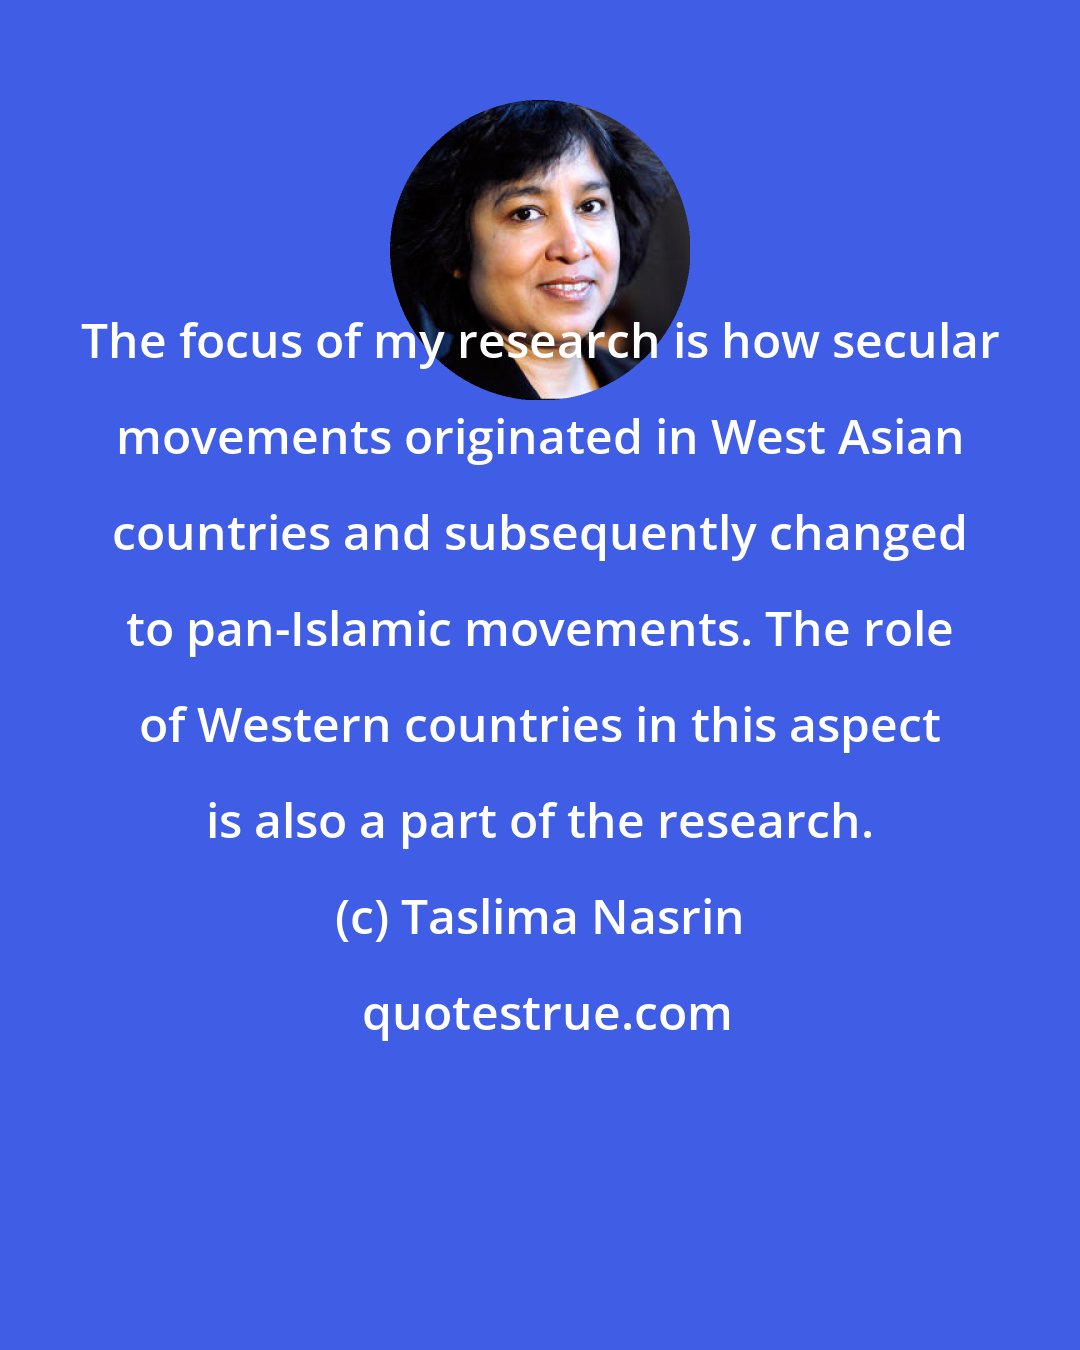 Taslima Nasrin: The focus of my research is how secular movements originated in West Asian countries and subsequently changed to pan-Islamic movements. The role of Western countries in this aspect is also a part of the research.